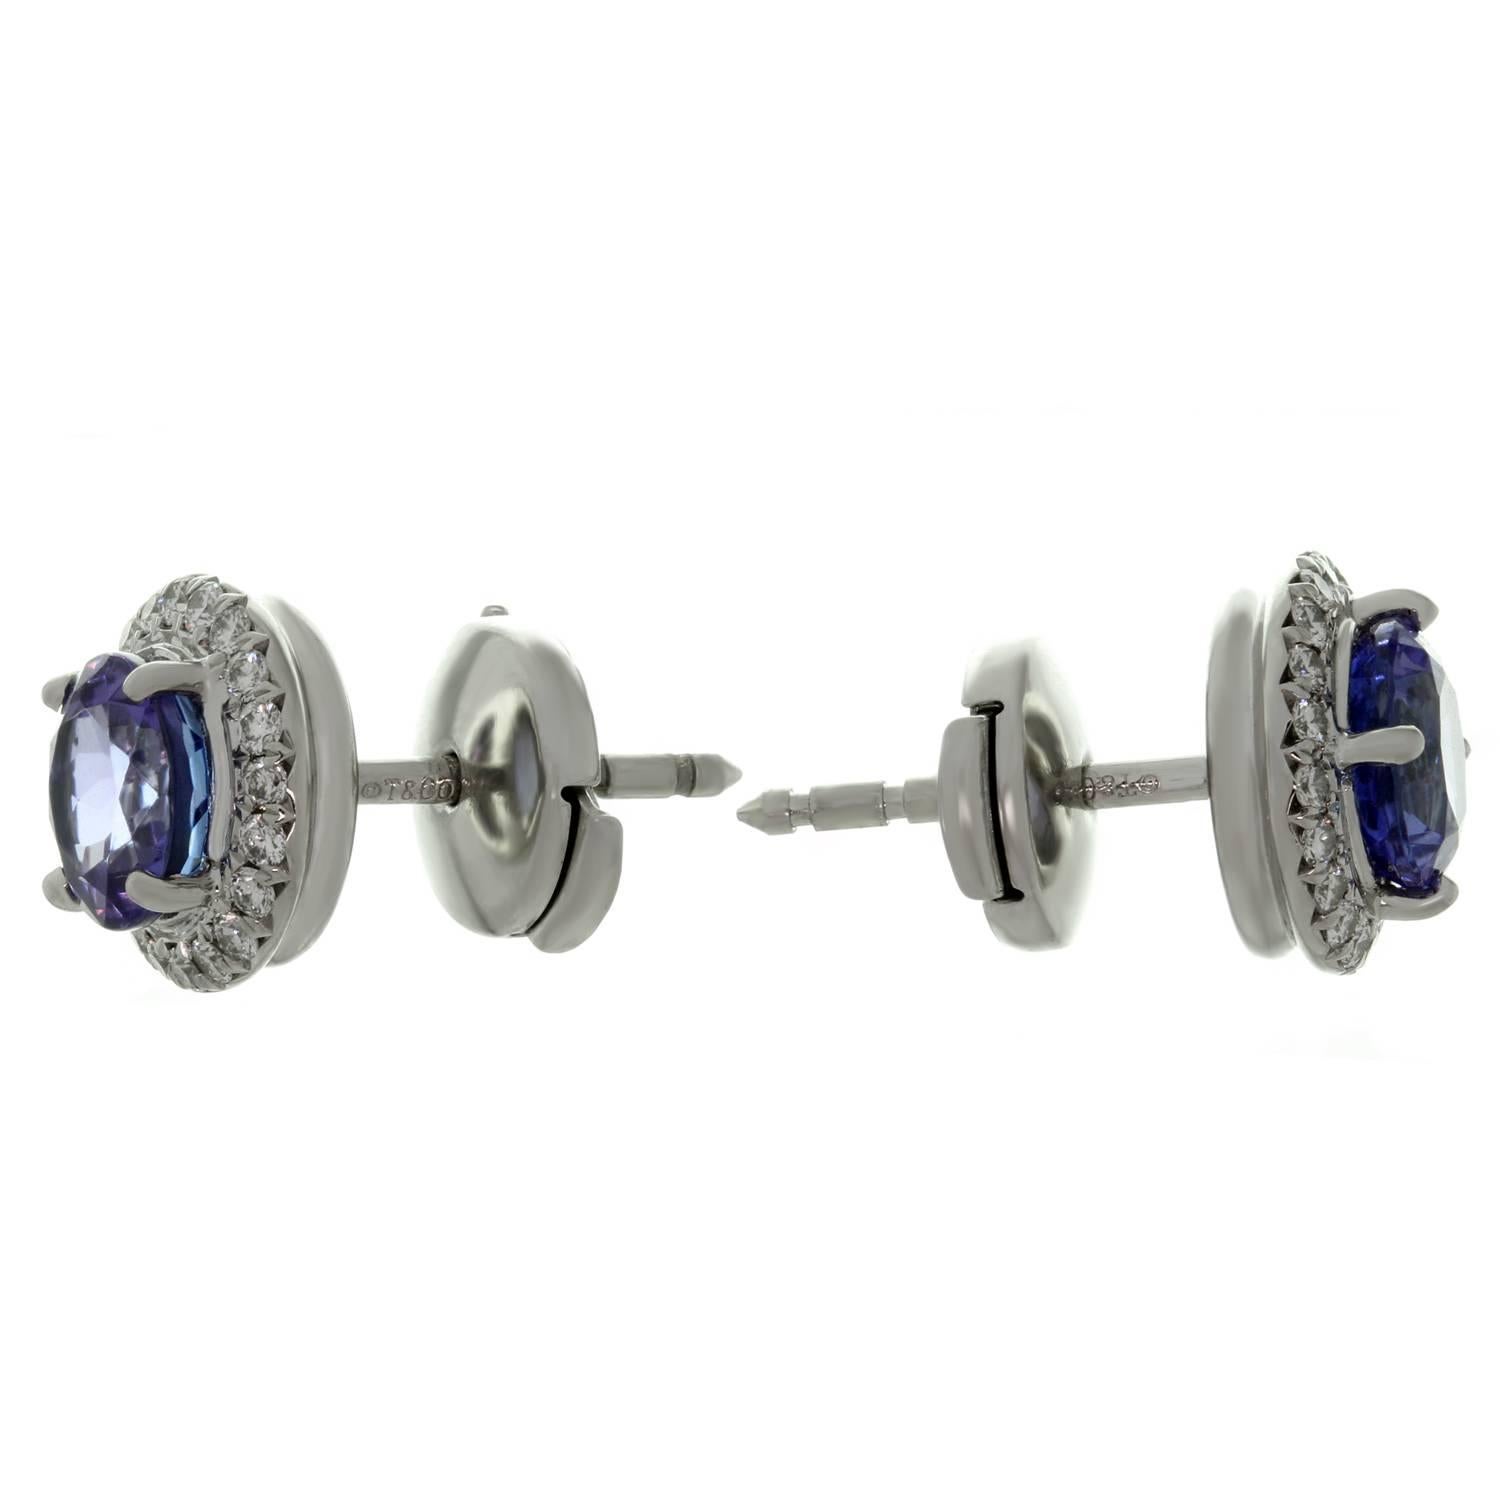 These exquisite stud earrings from Tiffany's Seleste collection are crafted in platinum and set dazzling tanzanites of an estimated 1.40 carats surrounded by brilliant-cut round diamonds of an estimated 0.20 carats. Made in United States circa